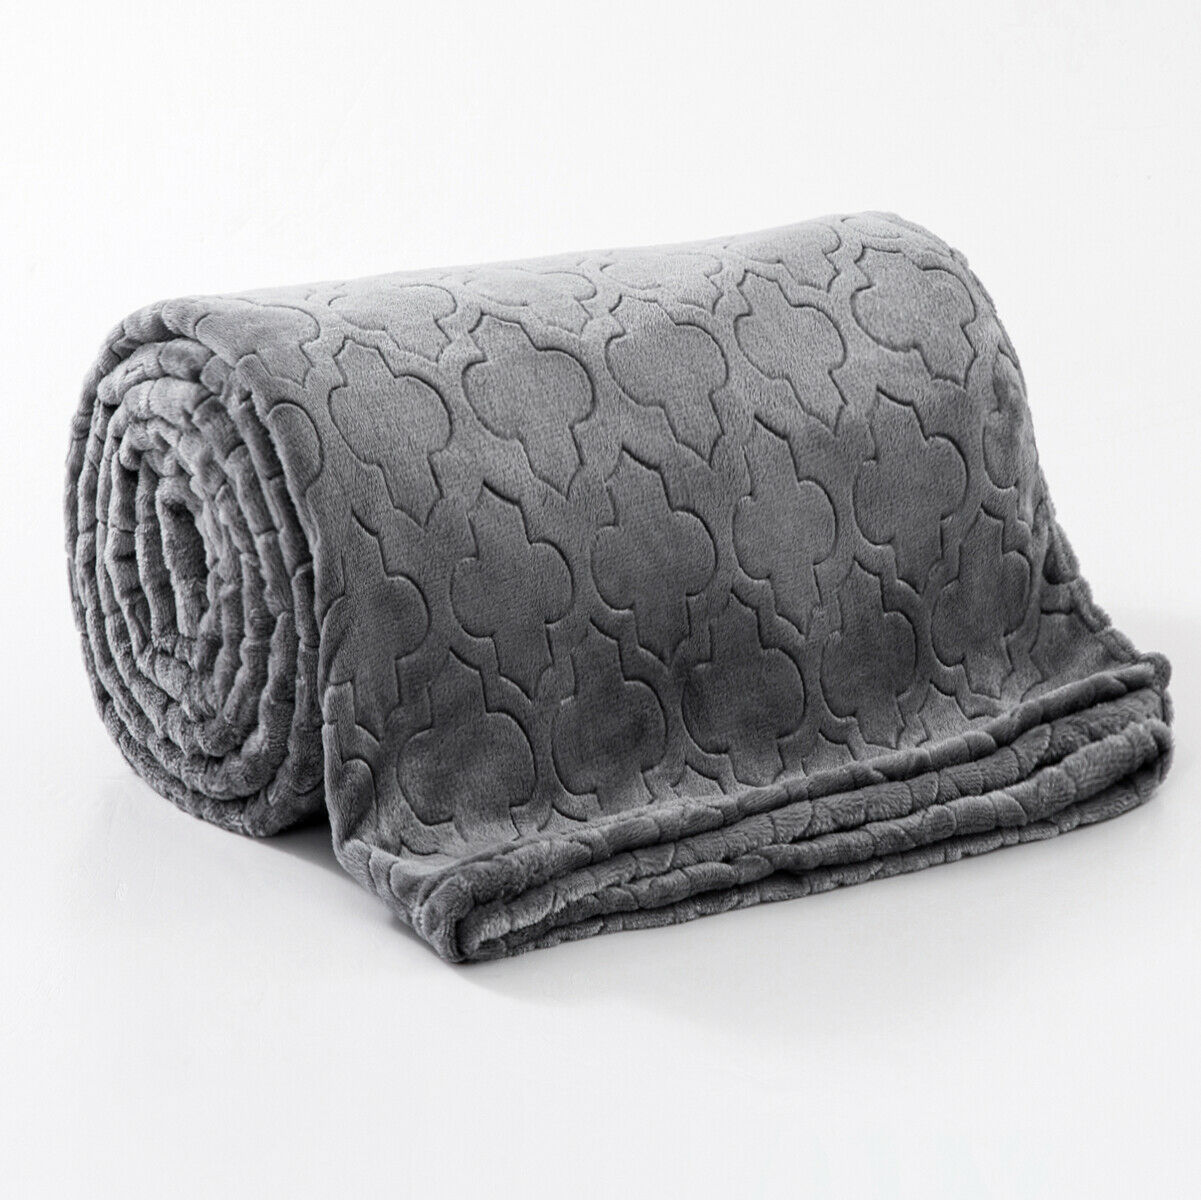 Embossed Throws For Sofas and Beds